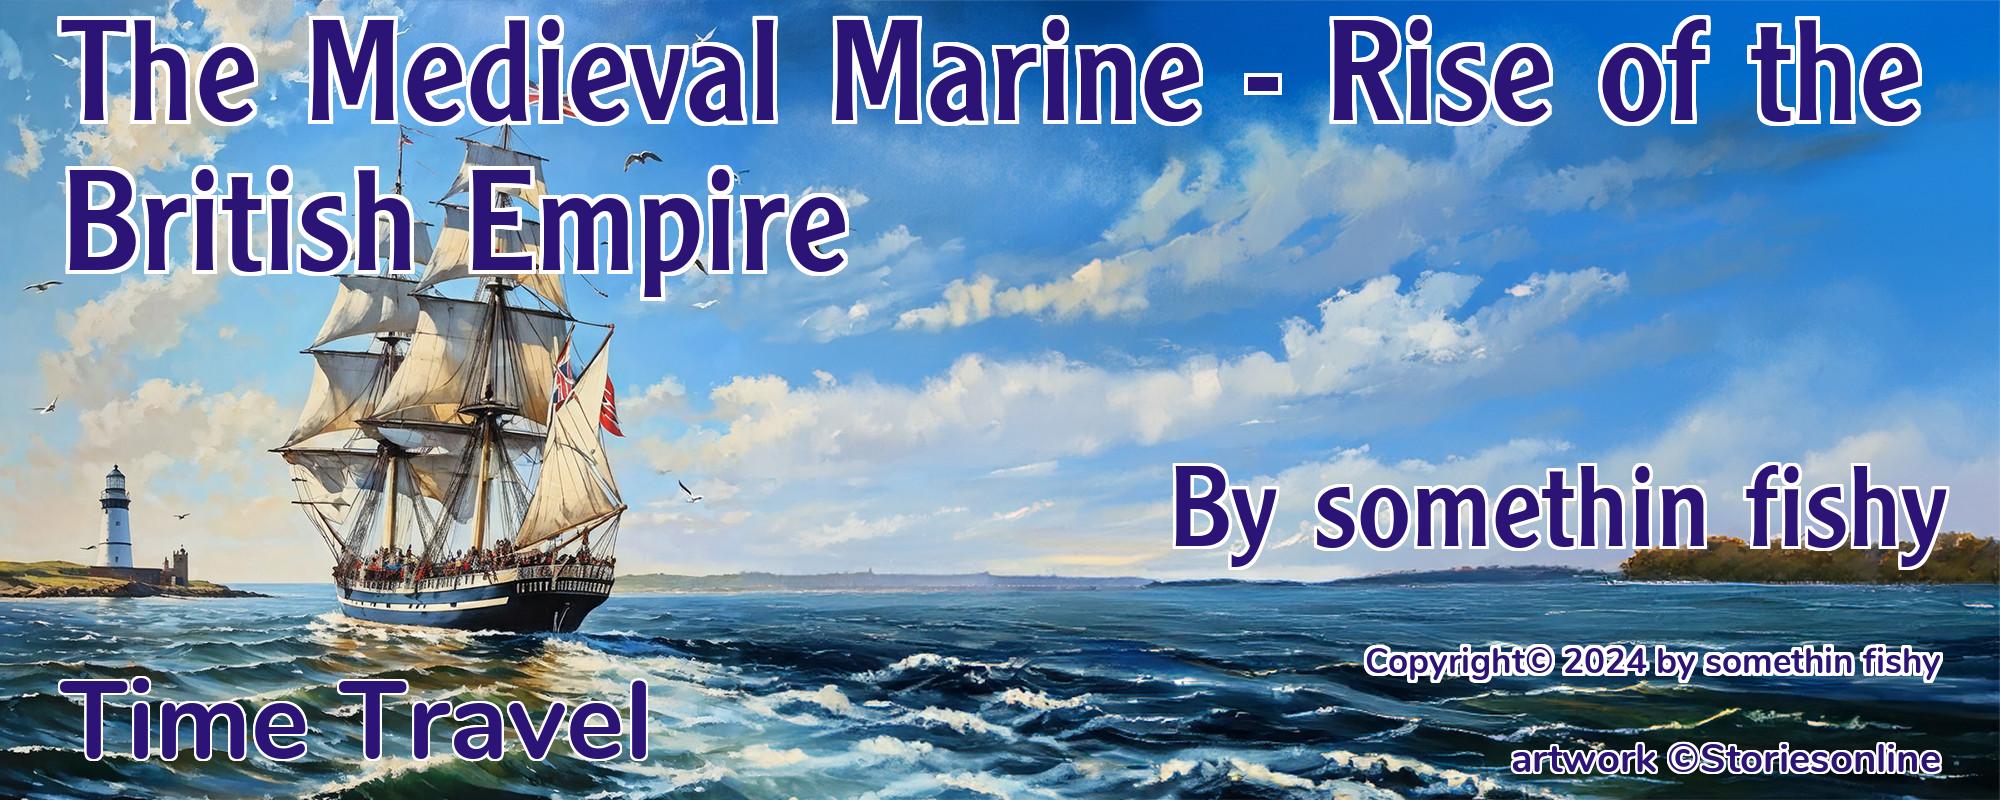 The Medieval Marine - Rise of the British Empire - Cover